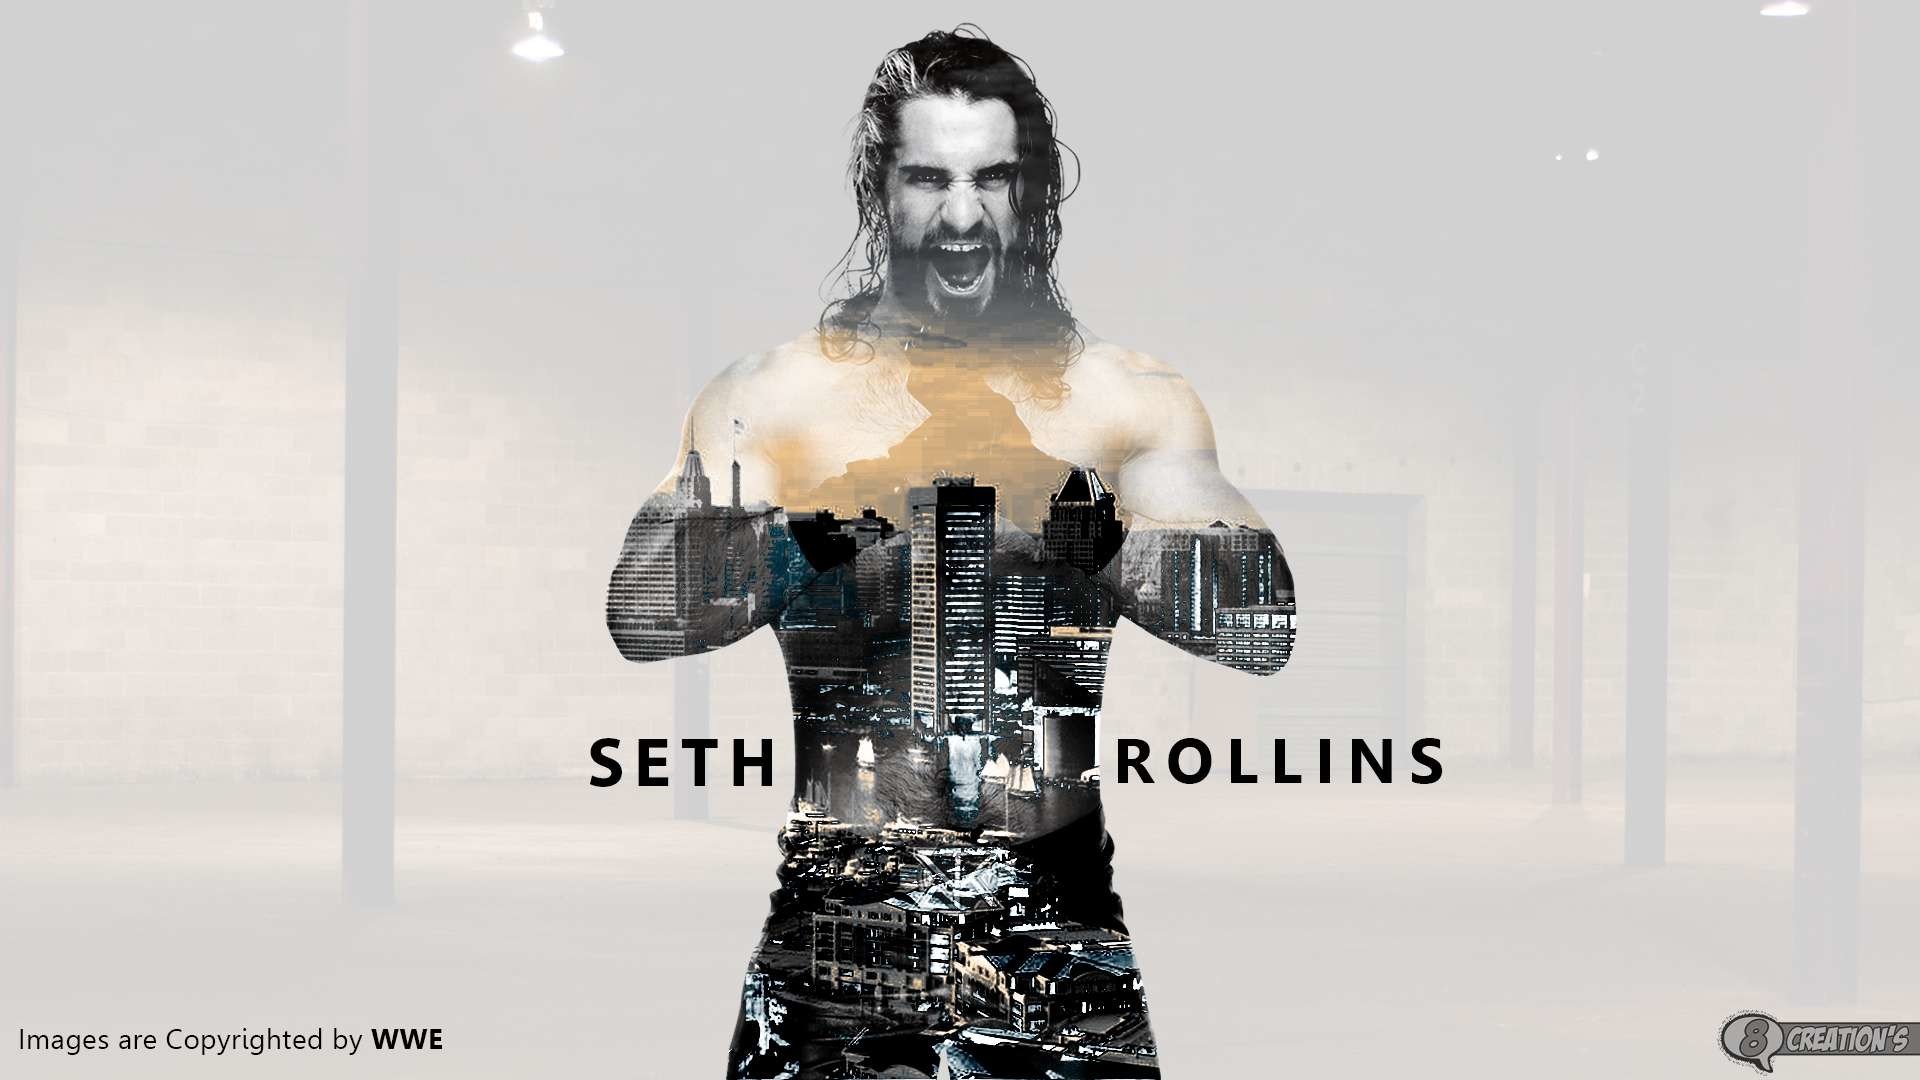 1920x1080 WWE Seth Rollins Wallpapers HD Pictures Â· 1920x1200 WWE Seth Rollins  Wallpapers HD Pictures